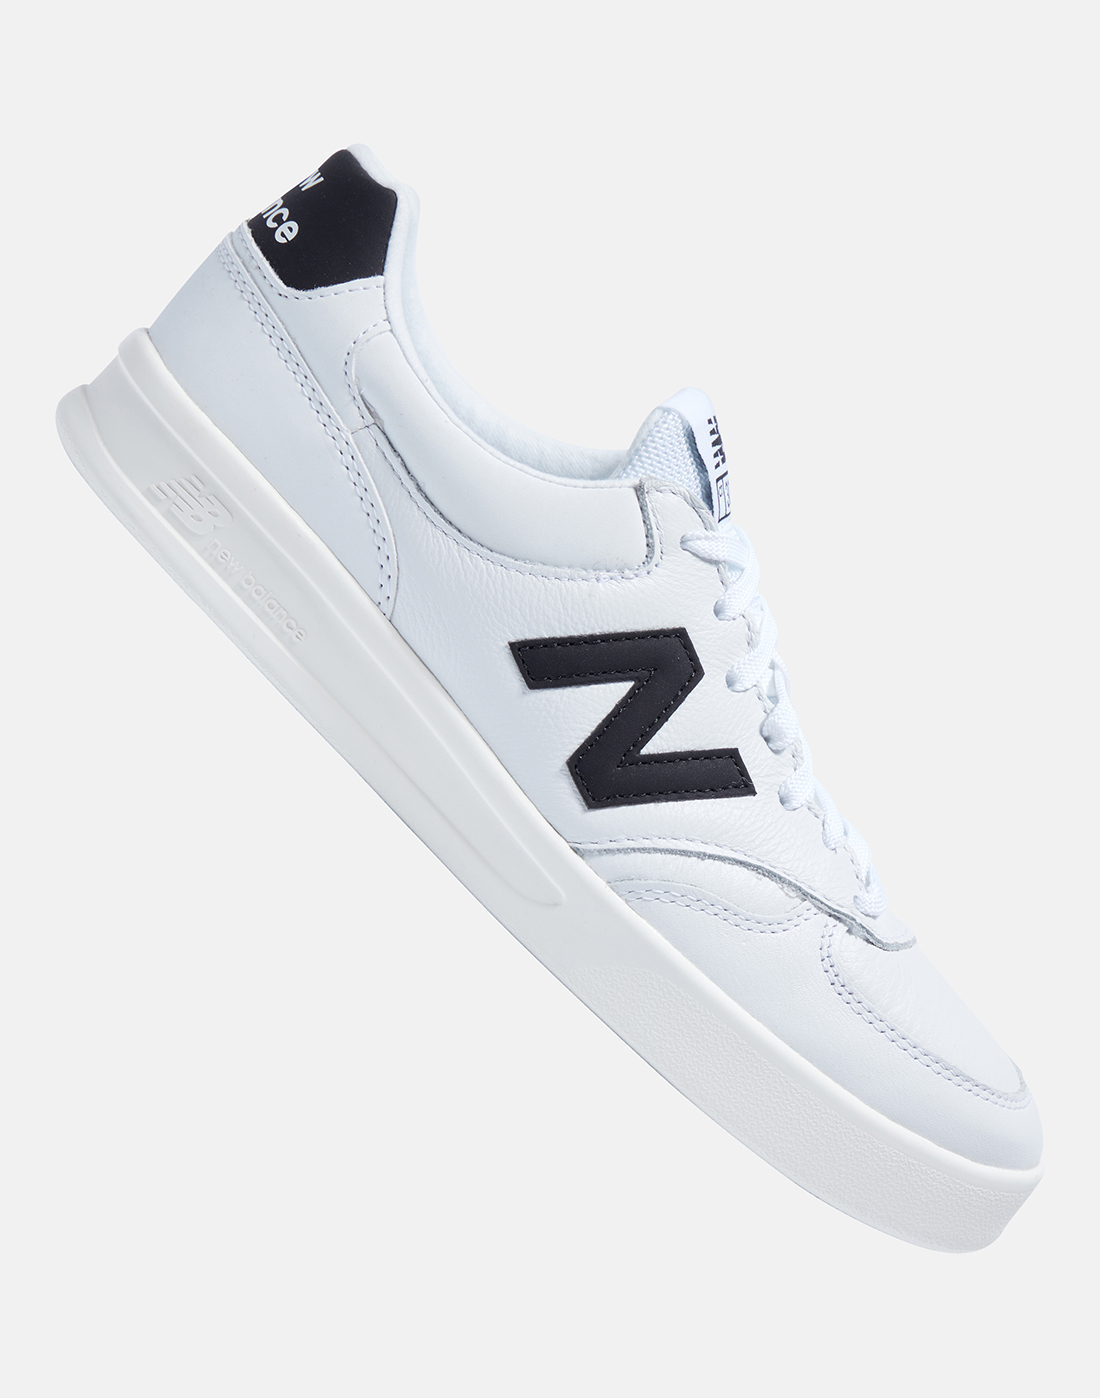 New Balance Mens CT300 Trainers White Life Style Sports IE | lupon.gov.ph